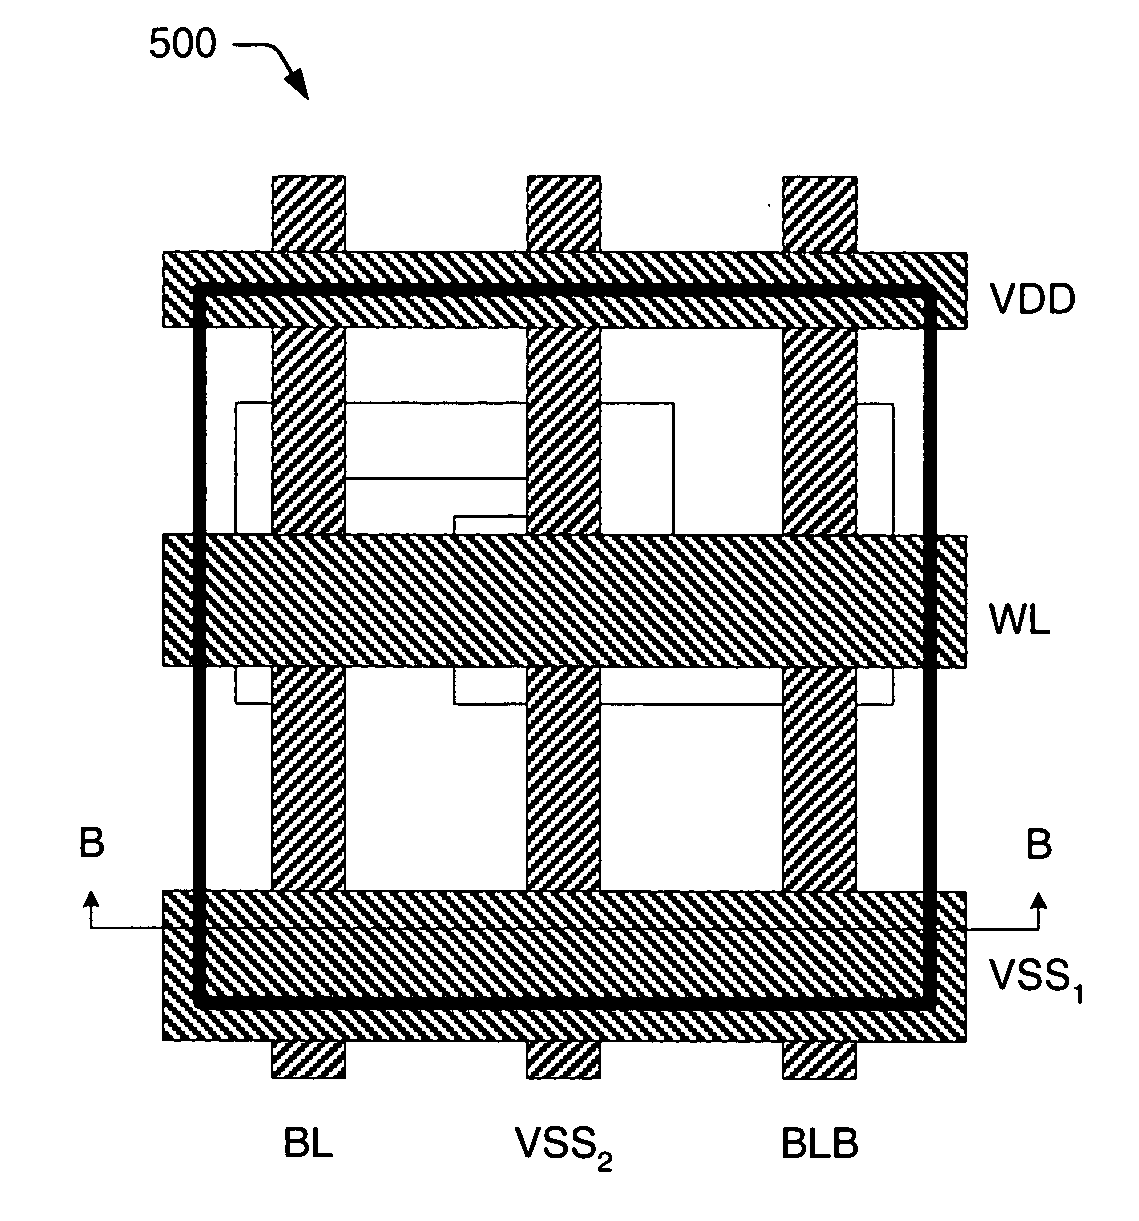 Memory cell architecture for reduced routing congestion